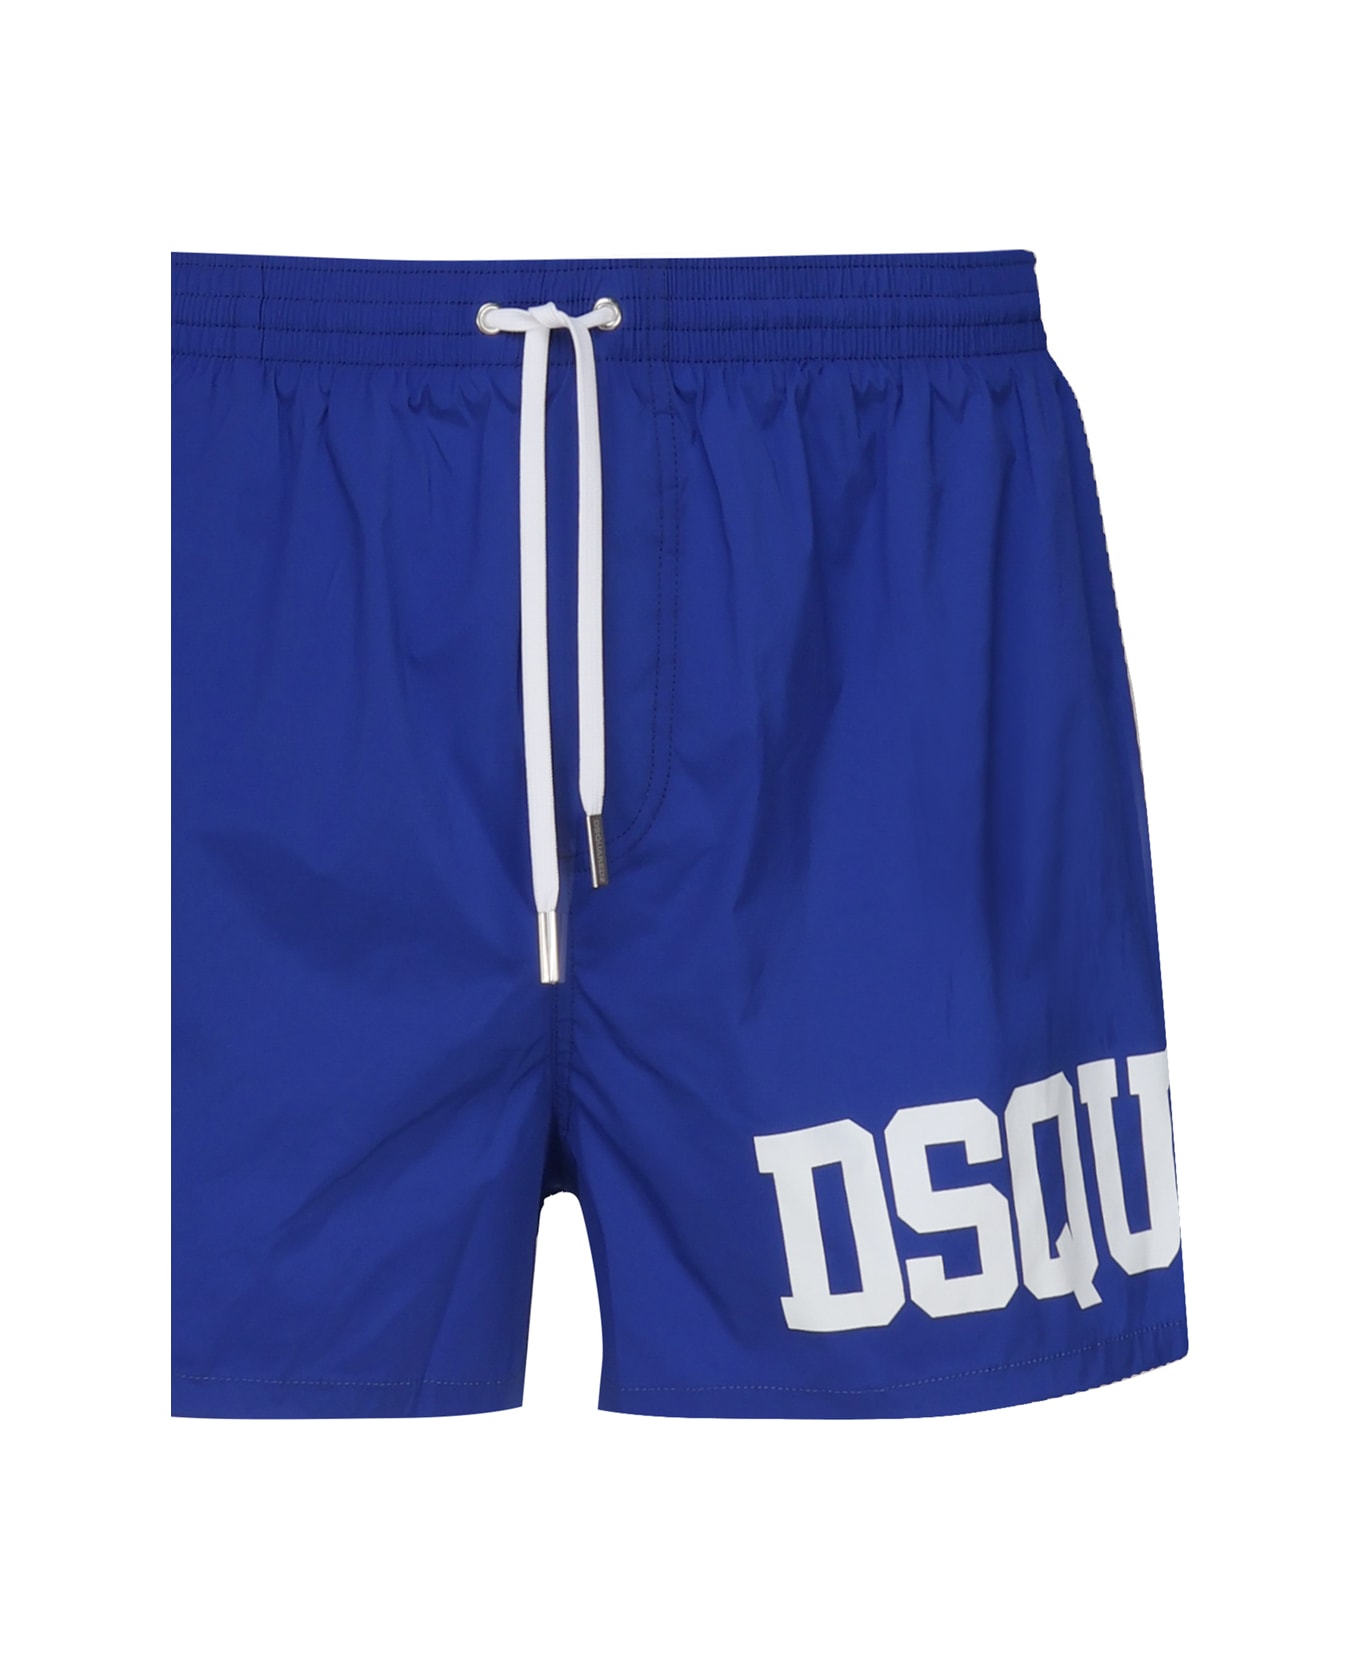 Dsquared2 Logo Swimsuit In Contrasting Color - Blue/white 水着